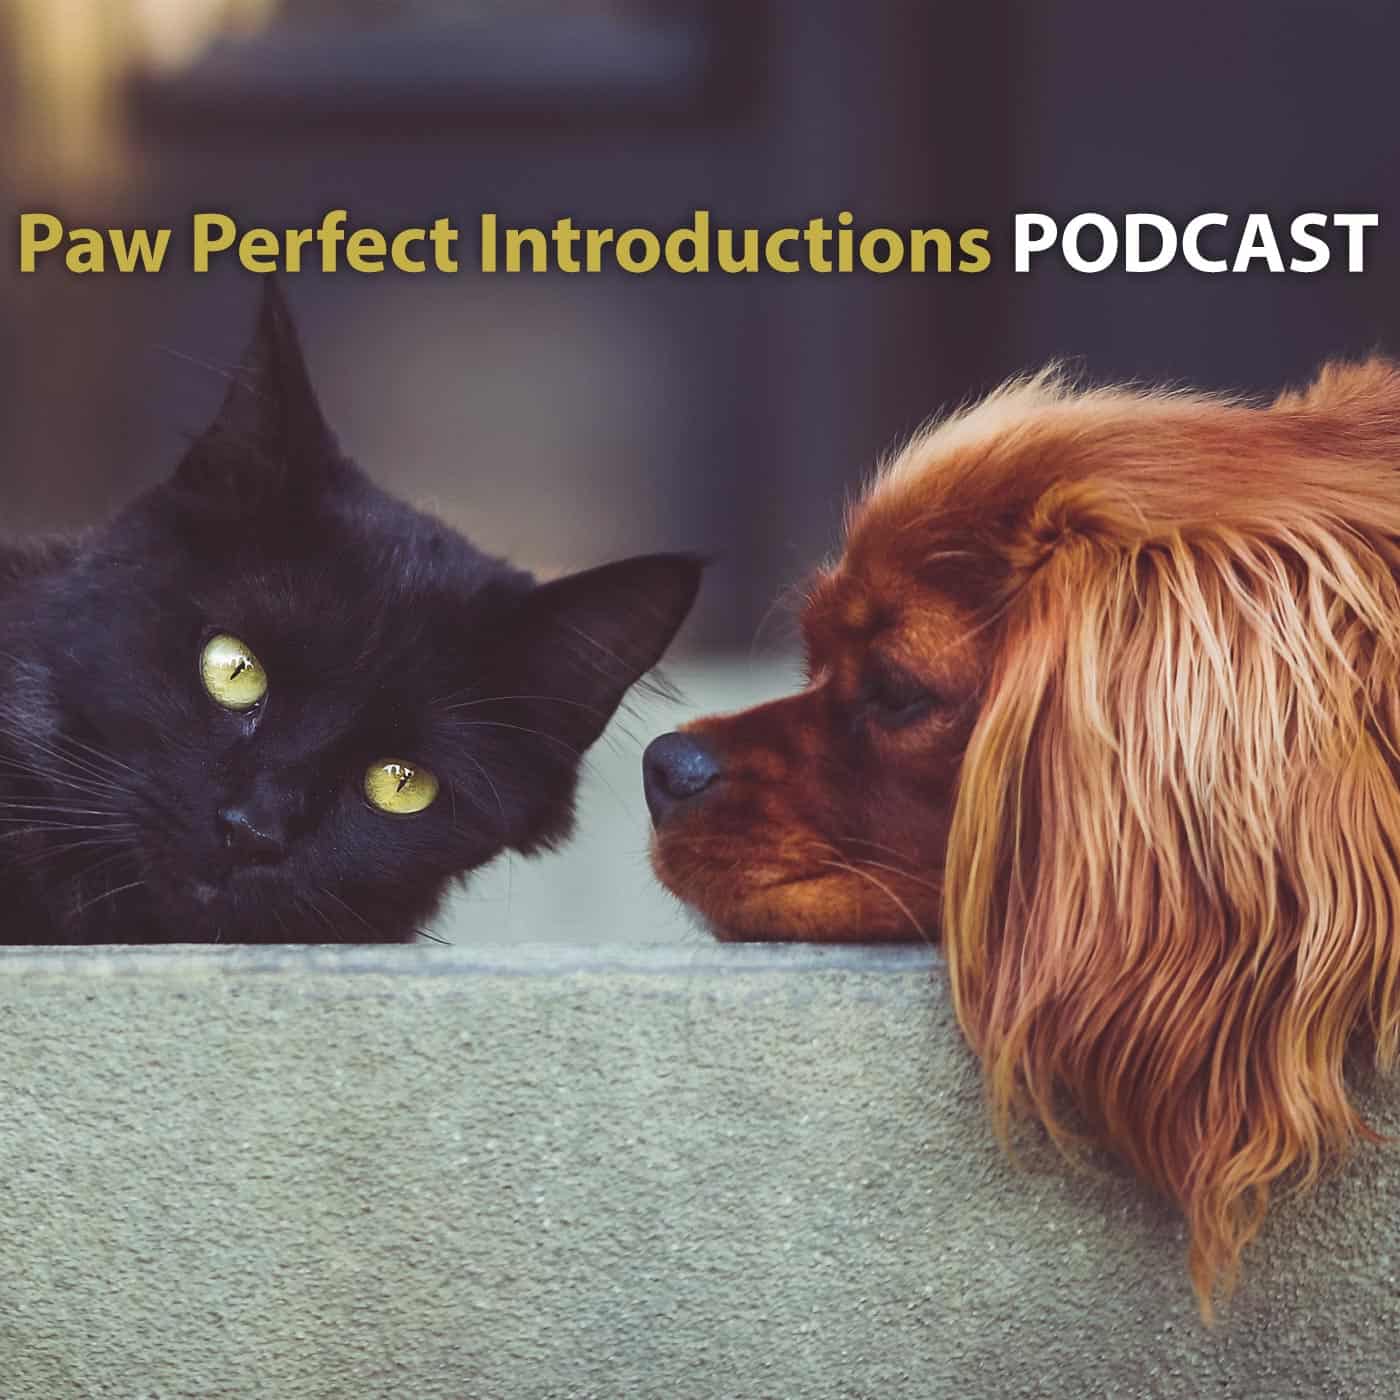 Paw Perfect Introductions